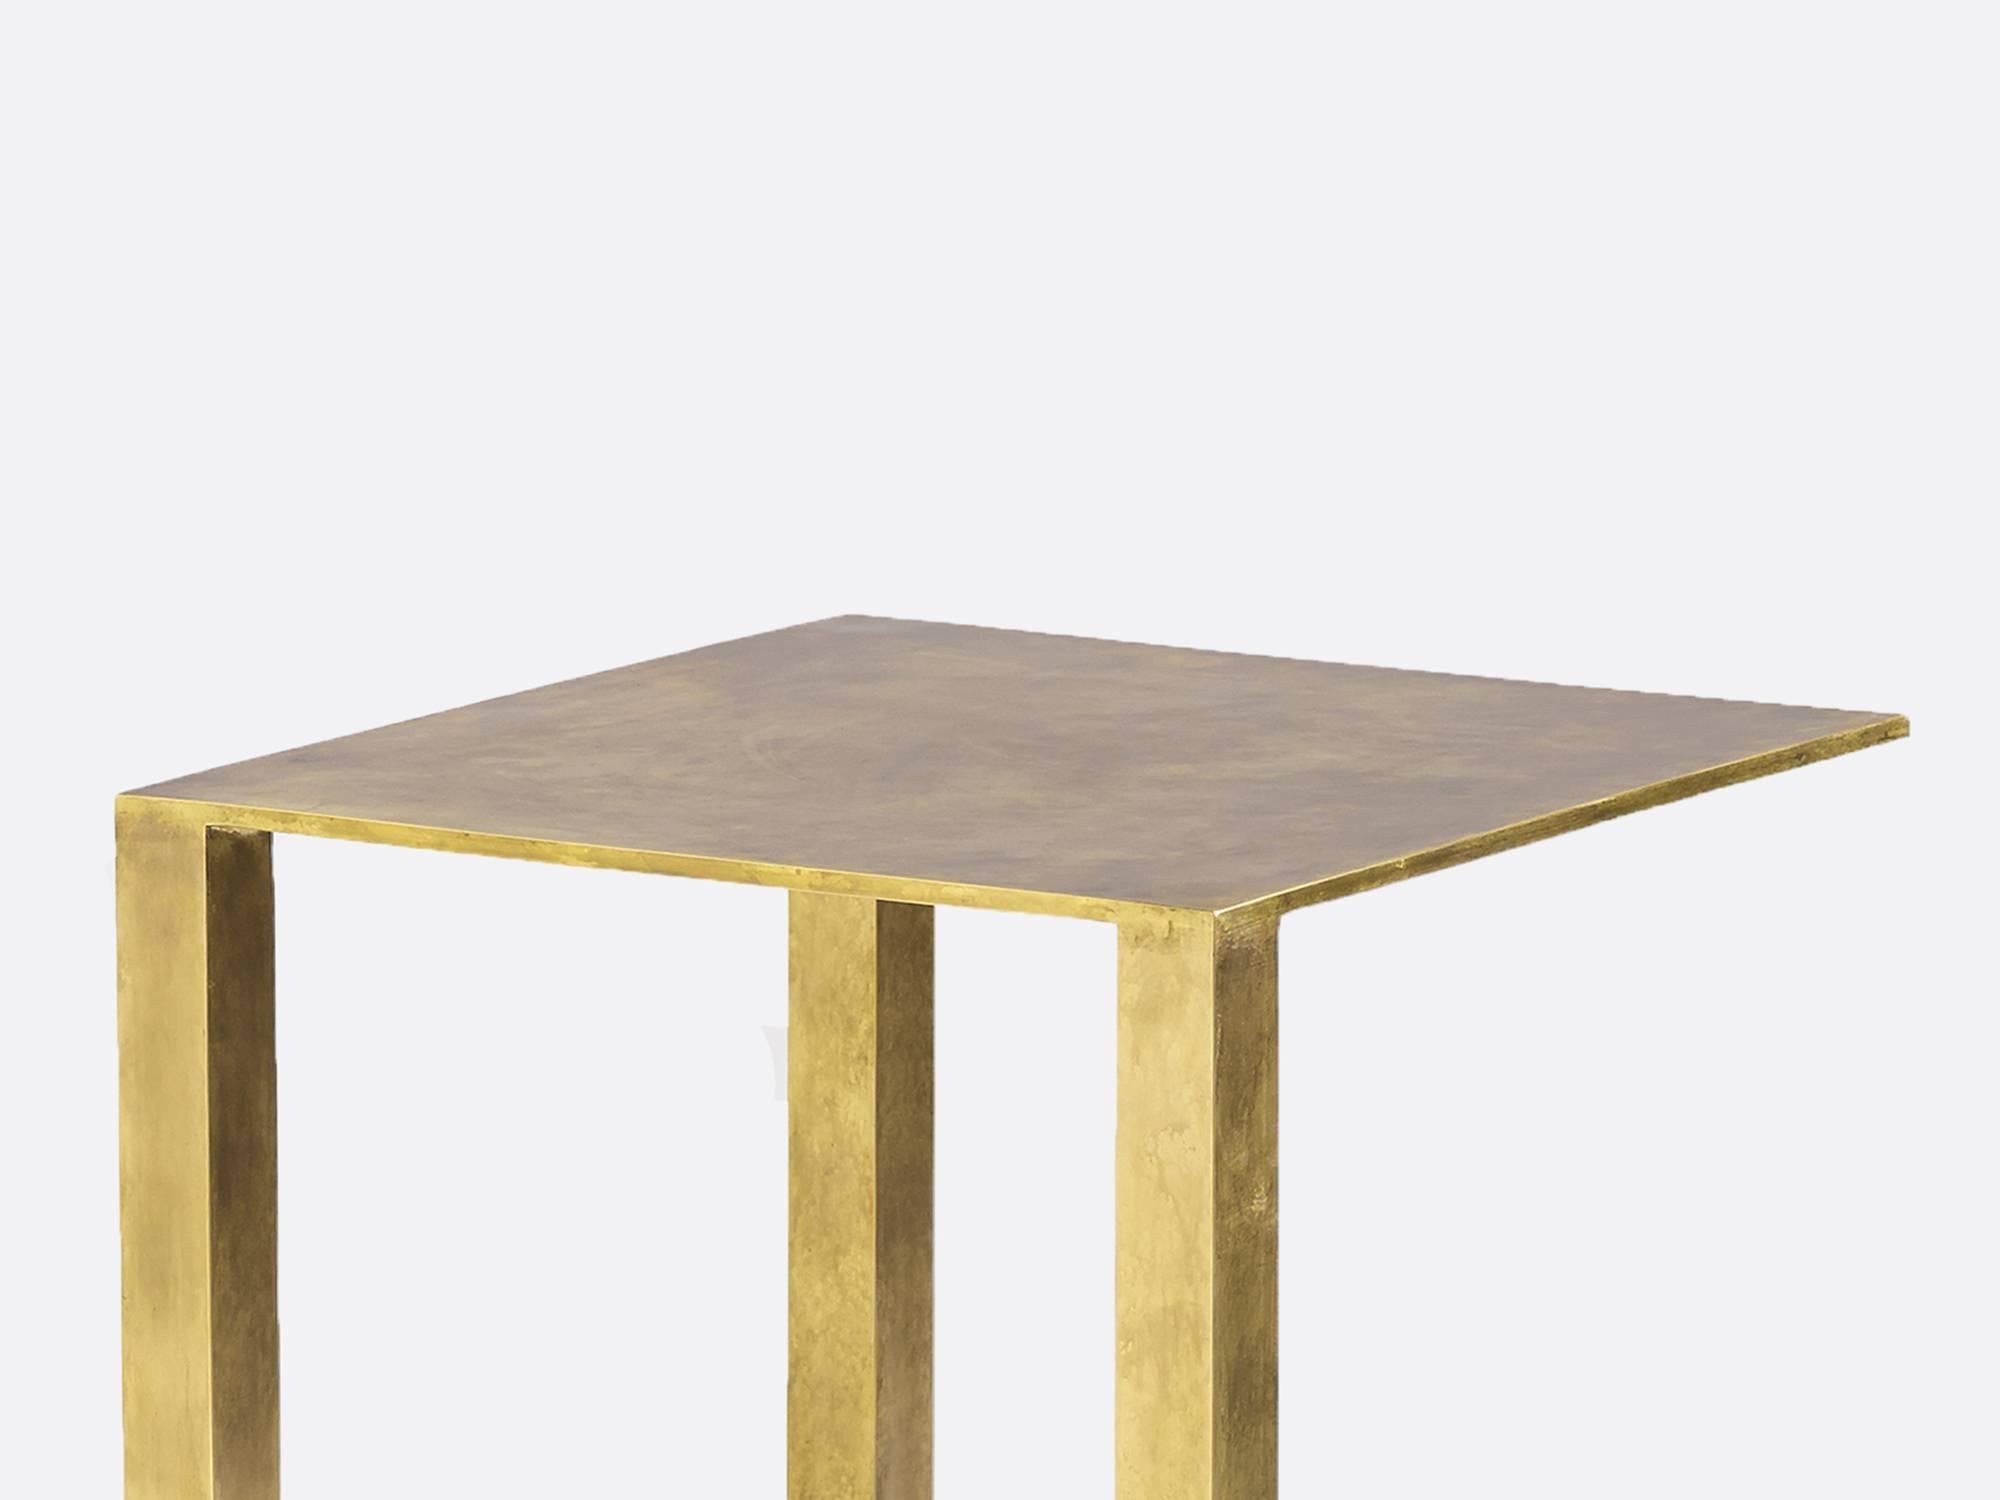 Cast bronze and brass table by LA-based designer Brian Thoreen. Custom sizes and finishes are available.